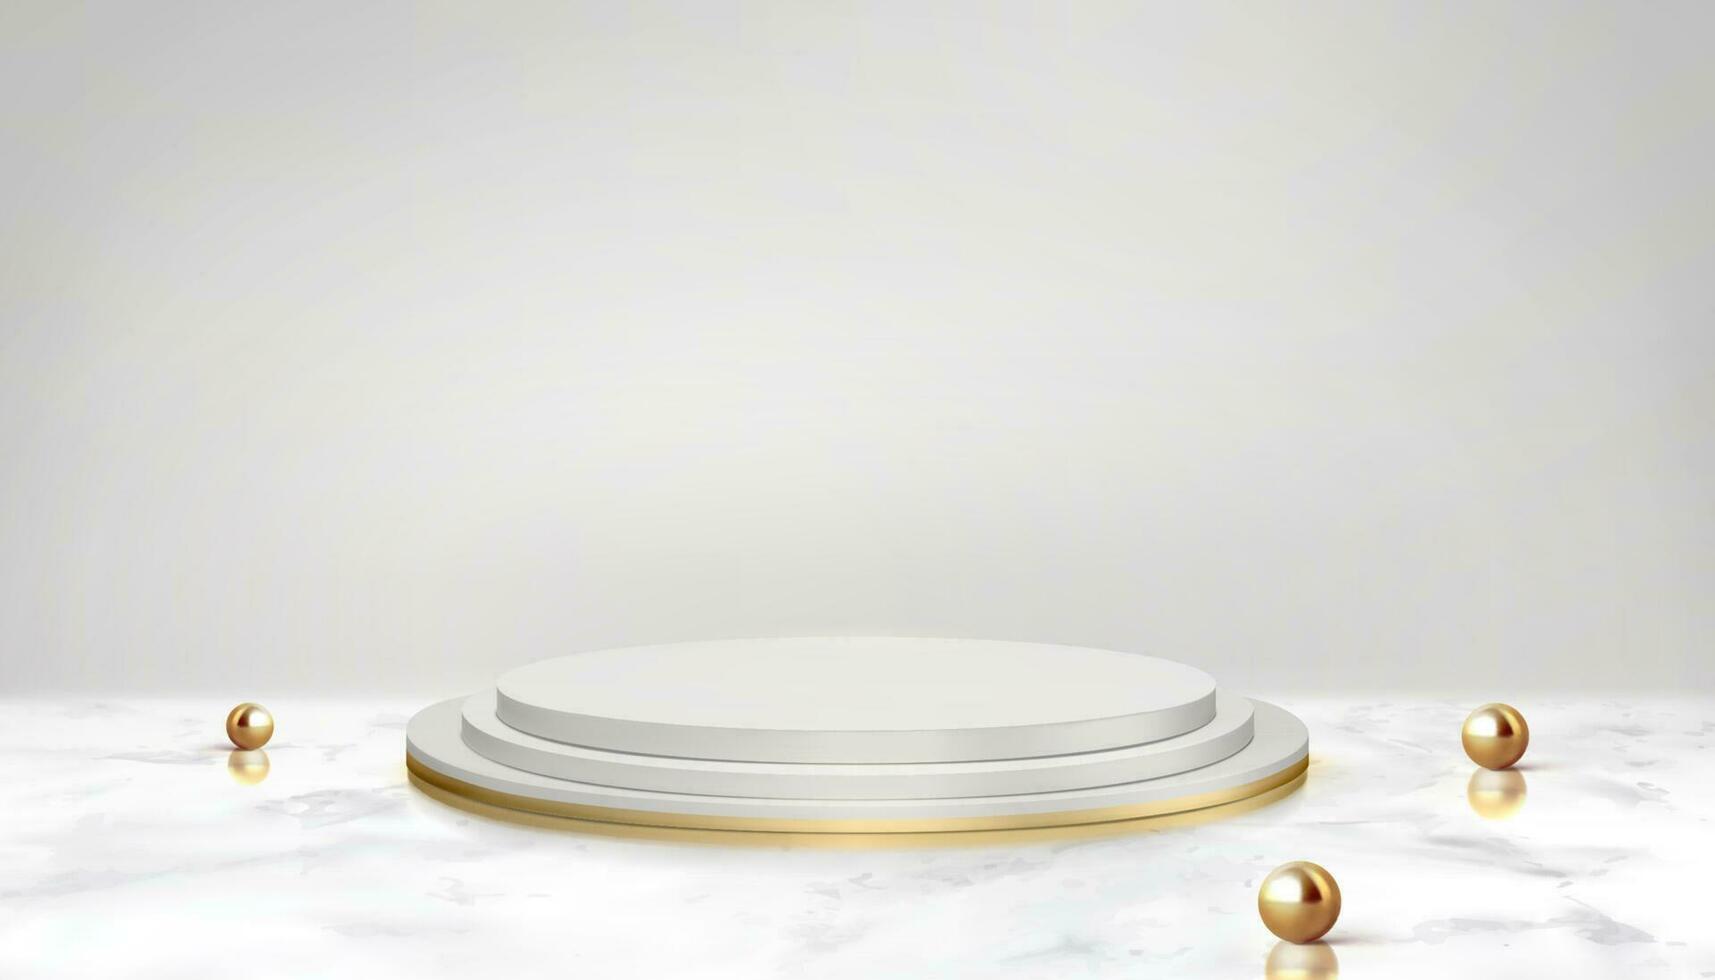 Product display podium on white background with golden pearls elements in 3d illustration vector